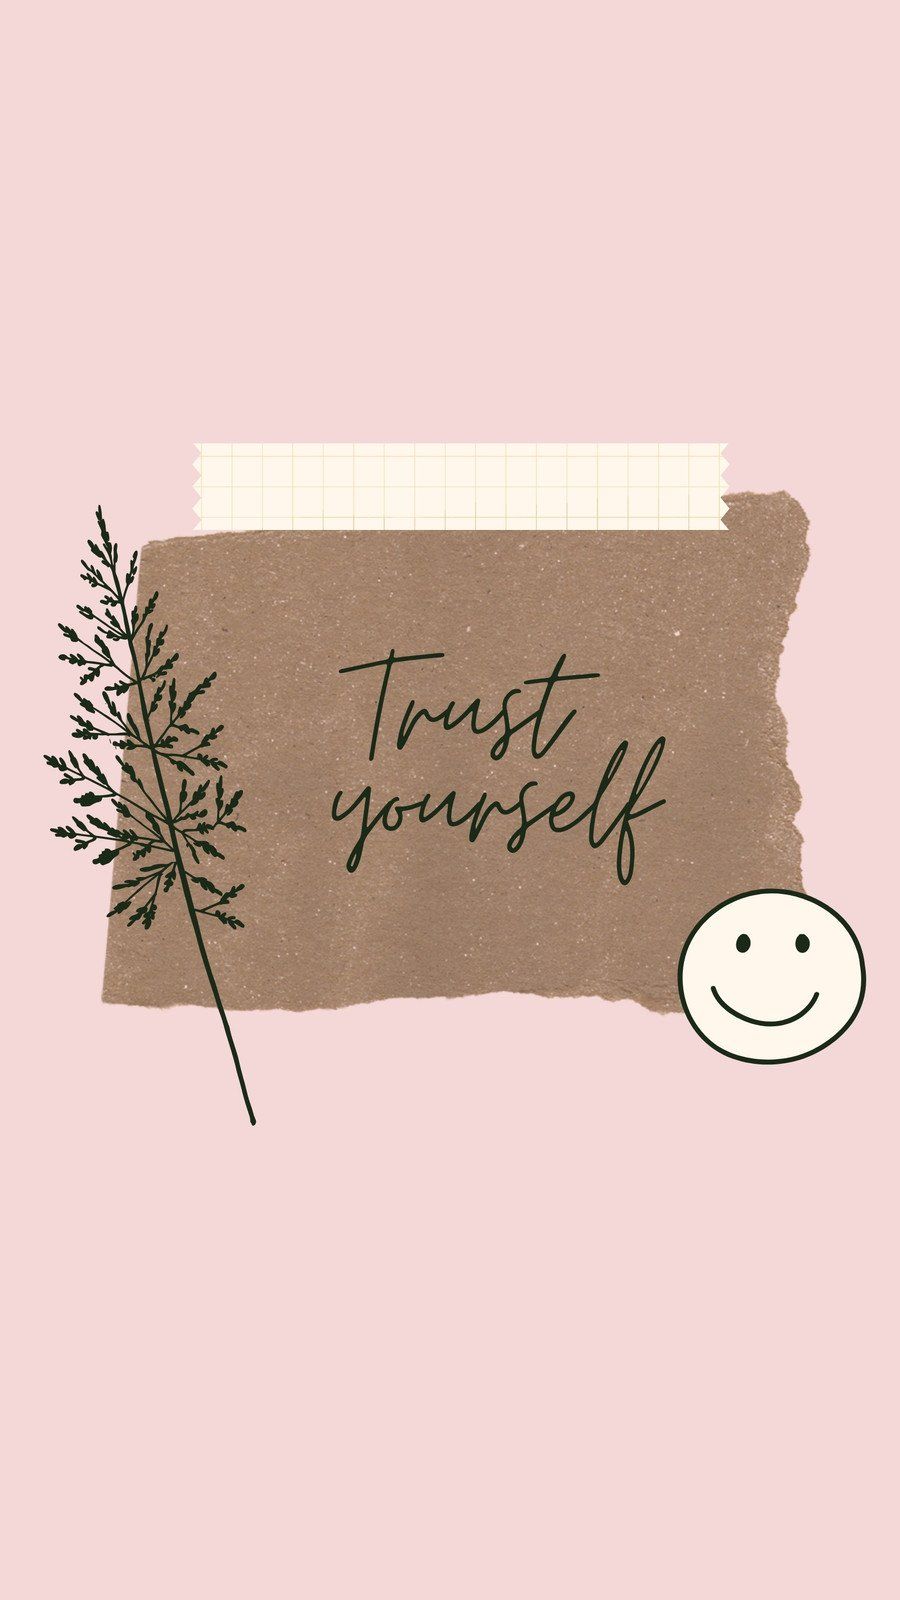 Trust yourself background